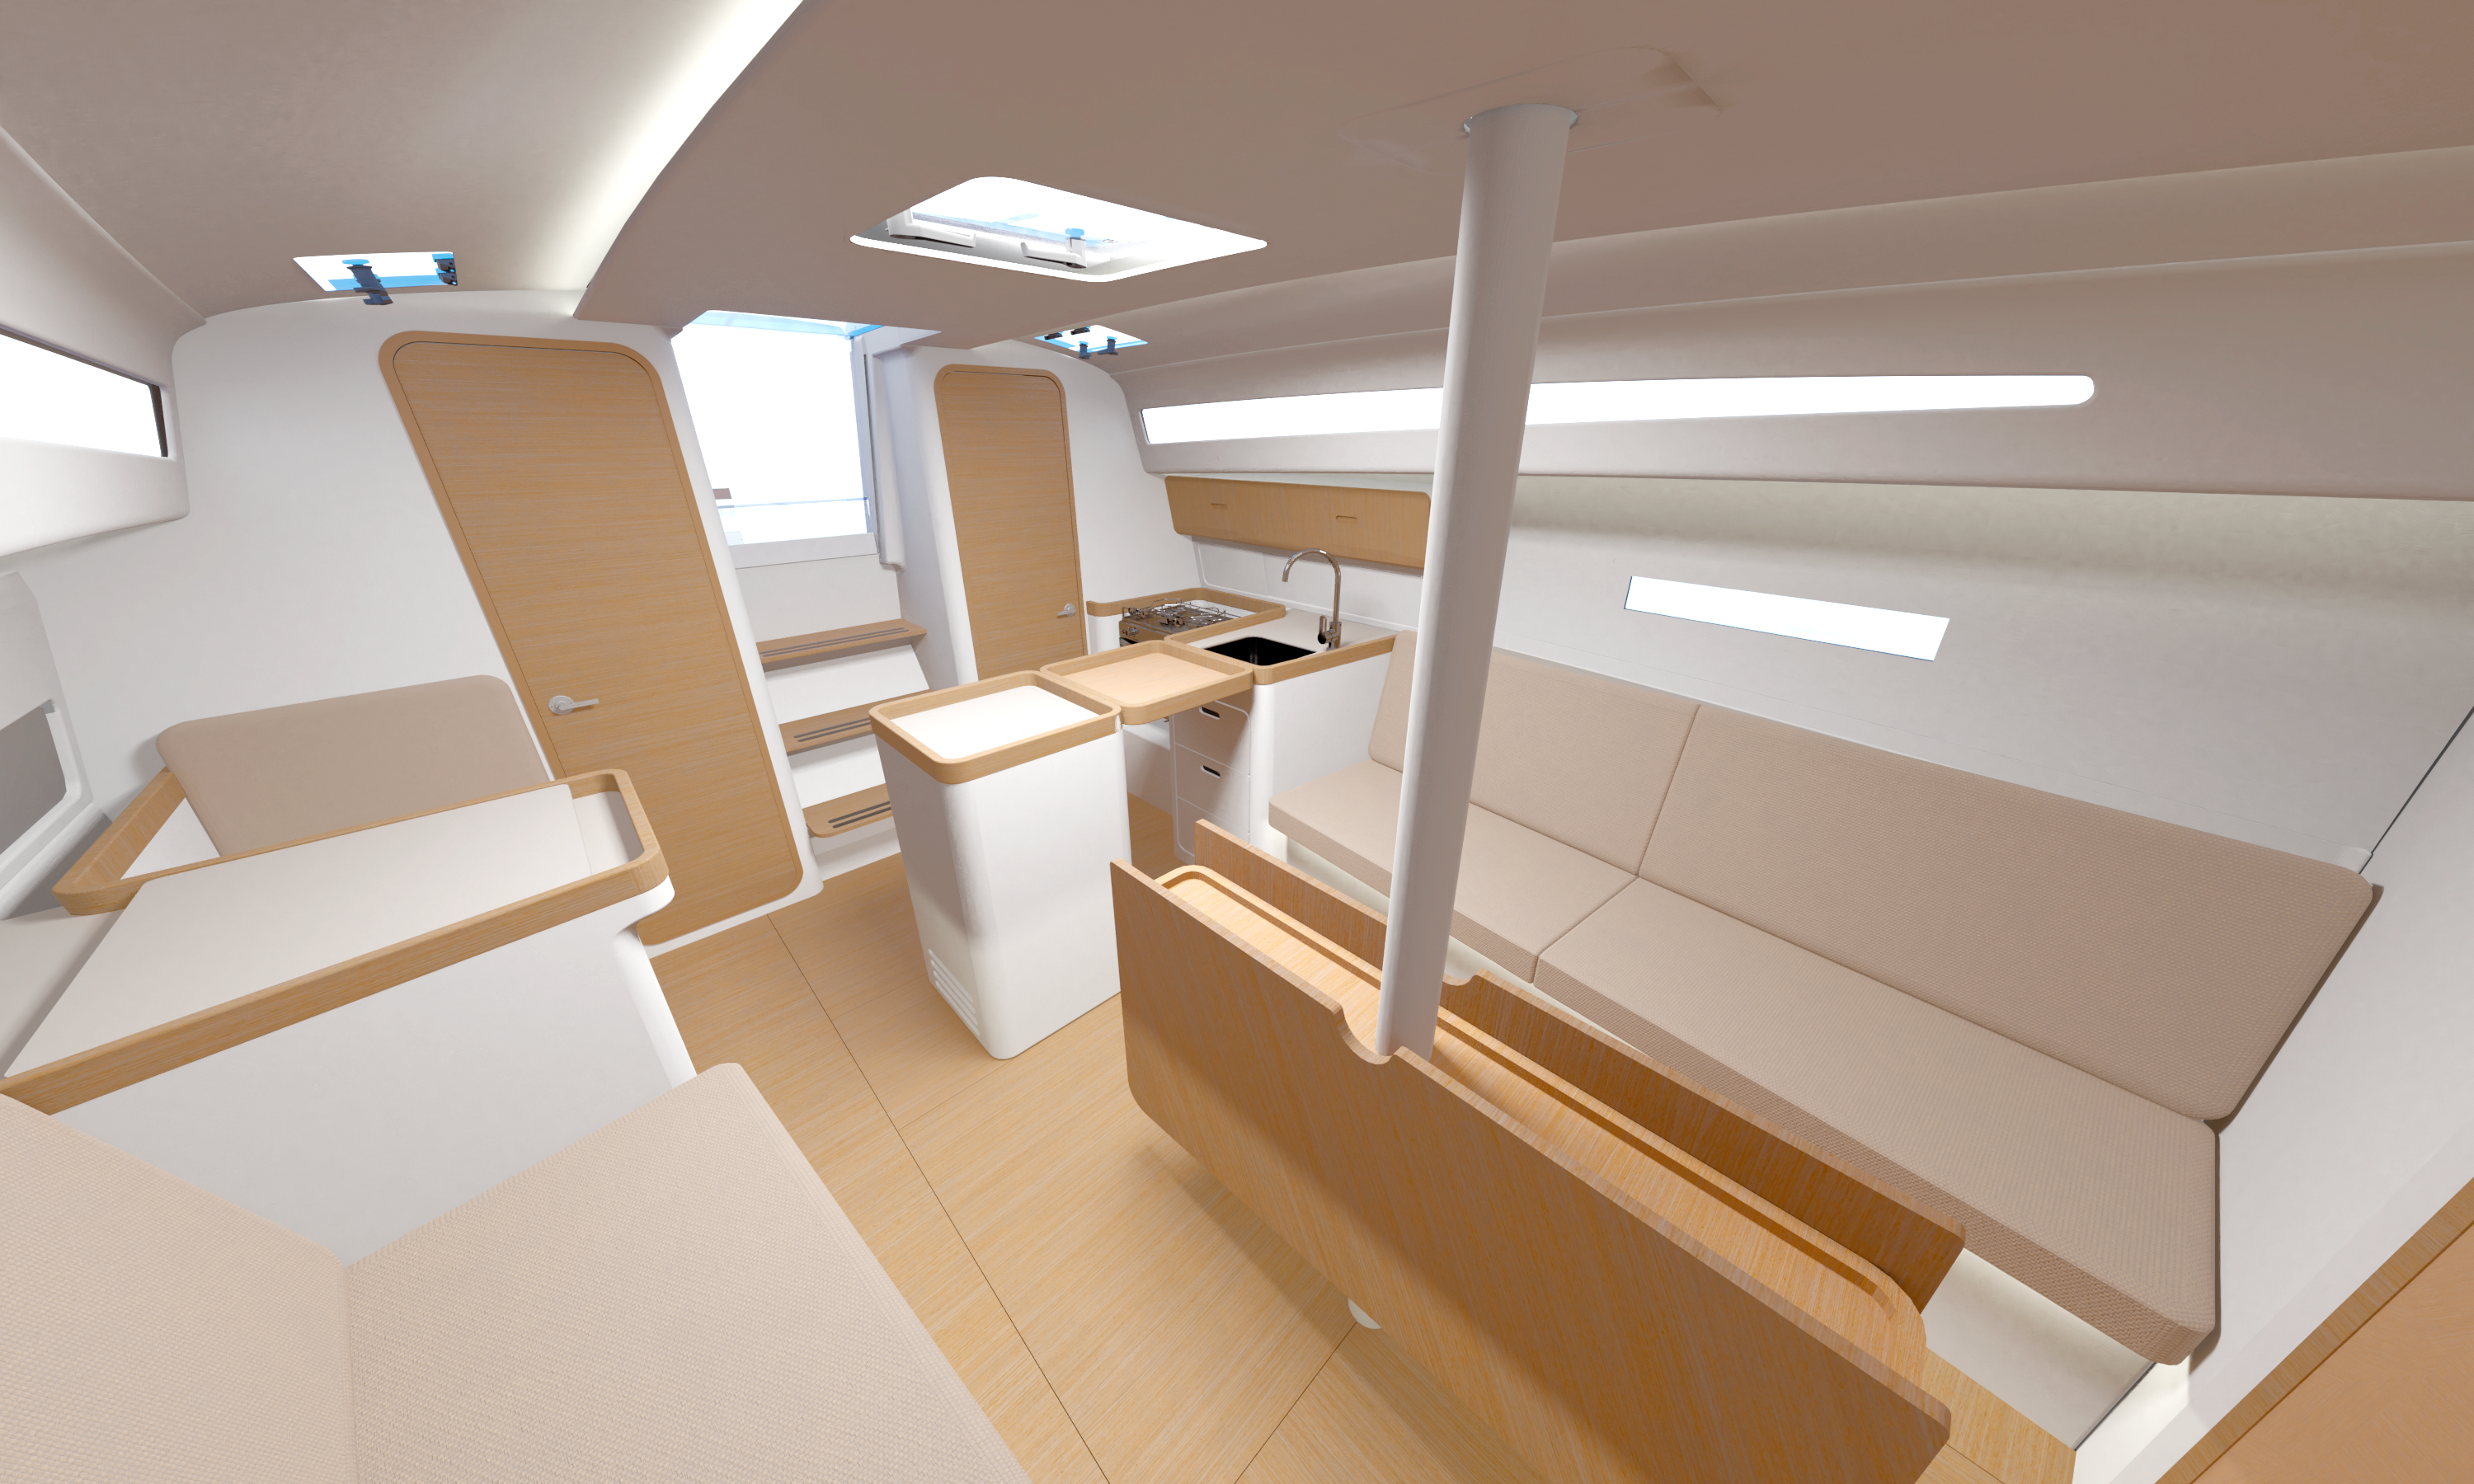 Beneteau FIRST 36 salon looking aft drawing